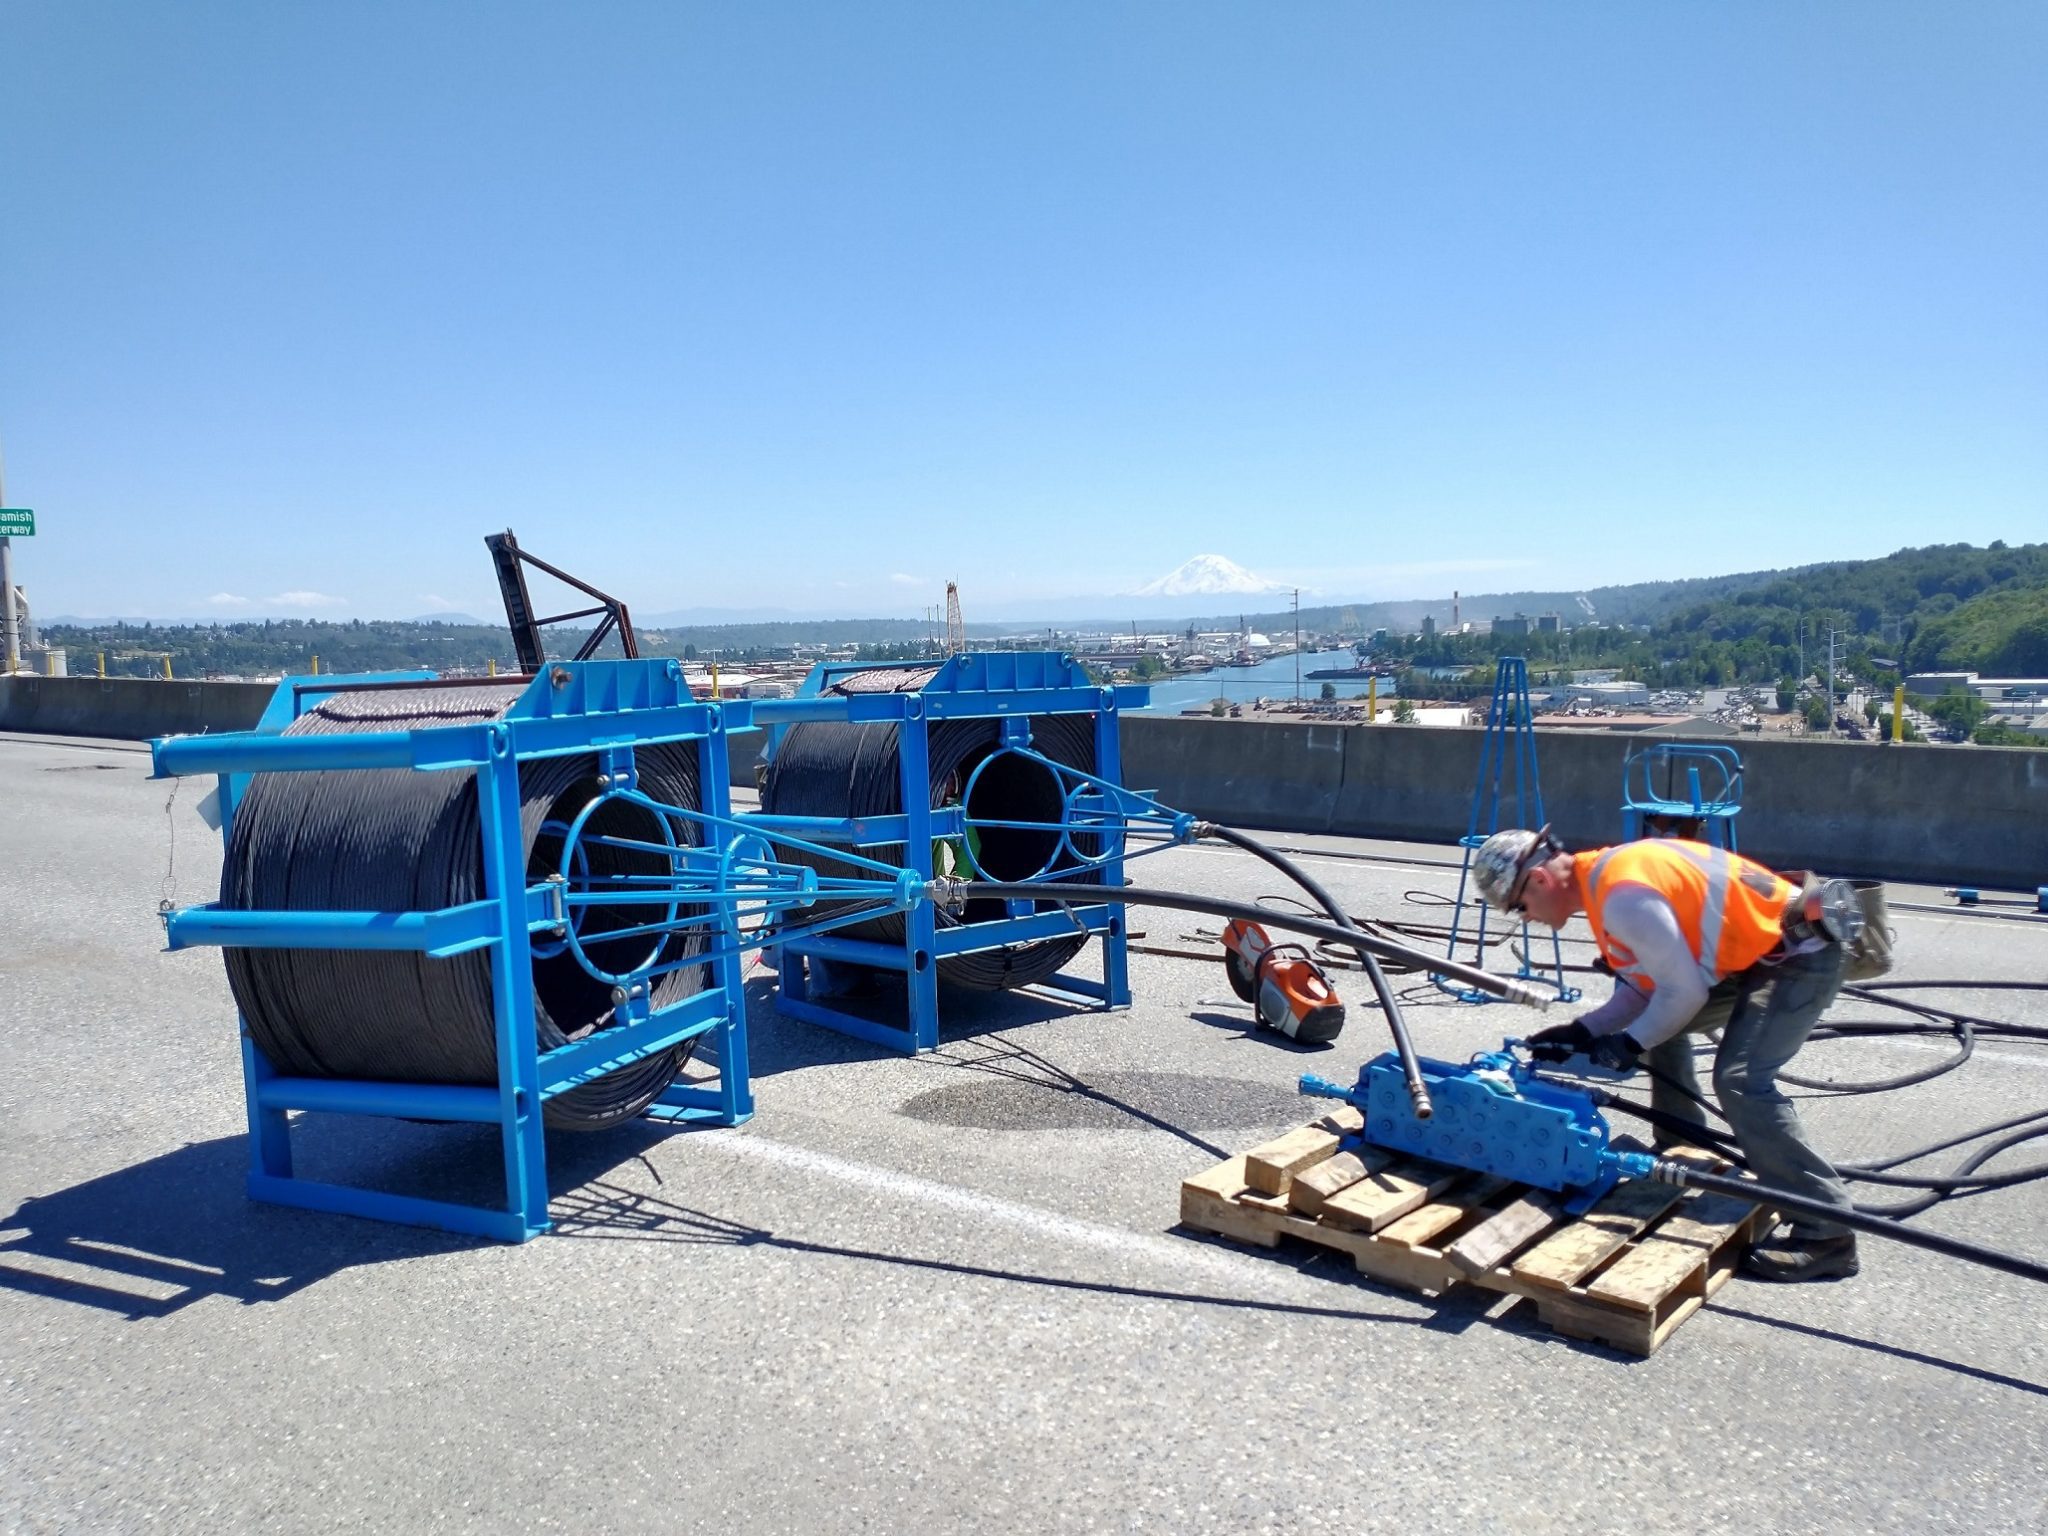 Steel cable is installed through protective pipes as part of the West Seattle Bridge’s newest post-tensioning system. A worker wearing an orange safety vest and hardhat works on the cables atop the bridge. Mount Rainier and the Duwamish Waterway are in the background.